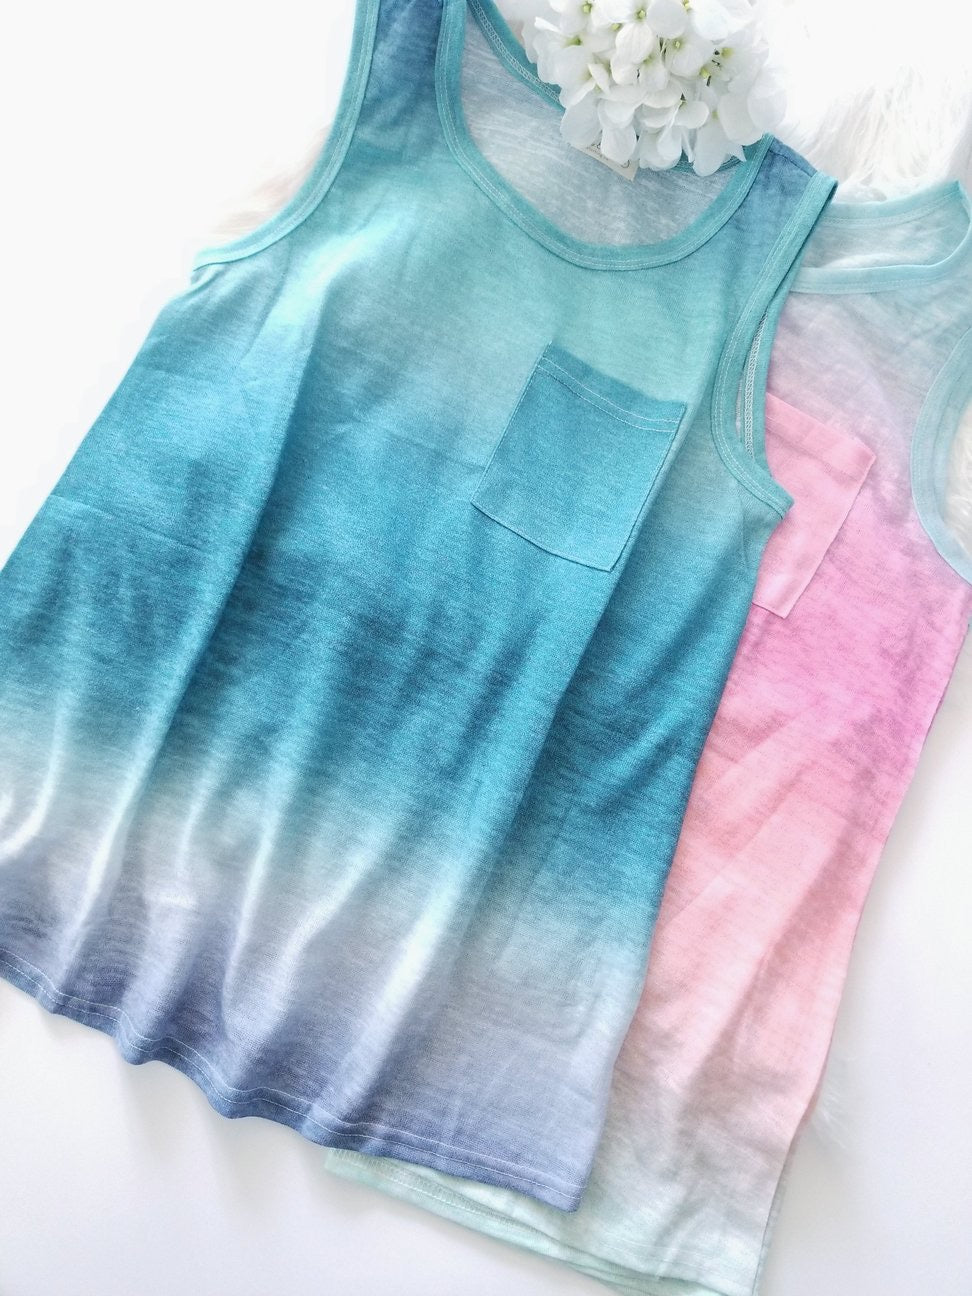 OVER THE RAINBOW OMBRE TANK